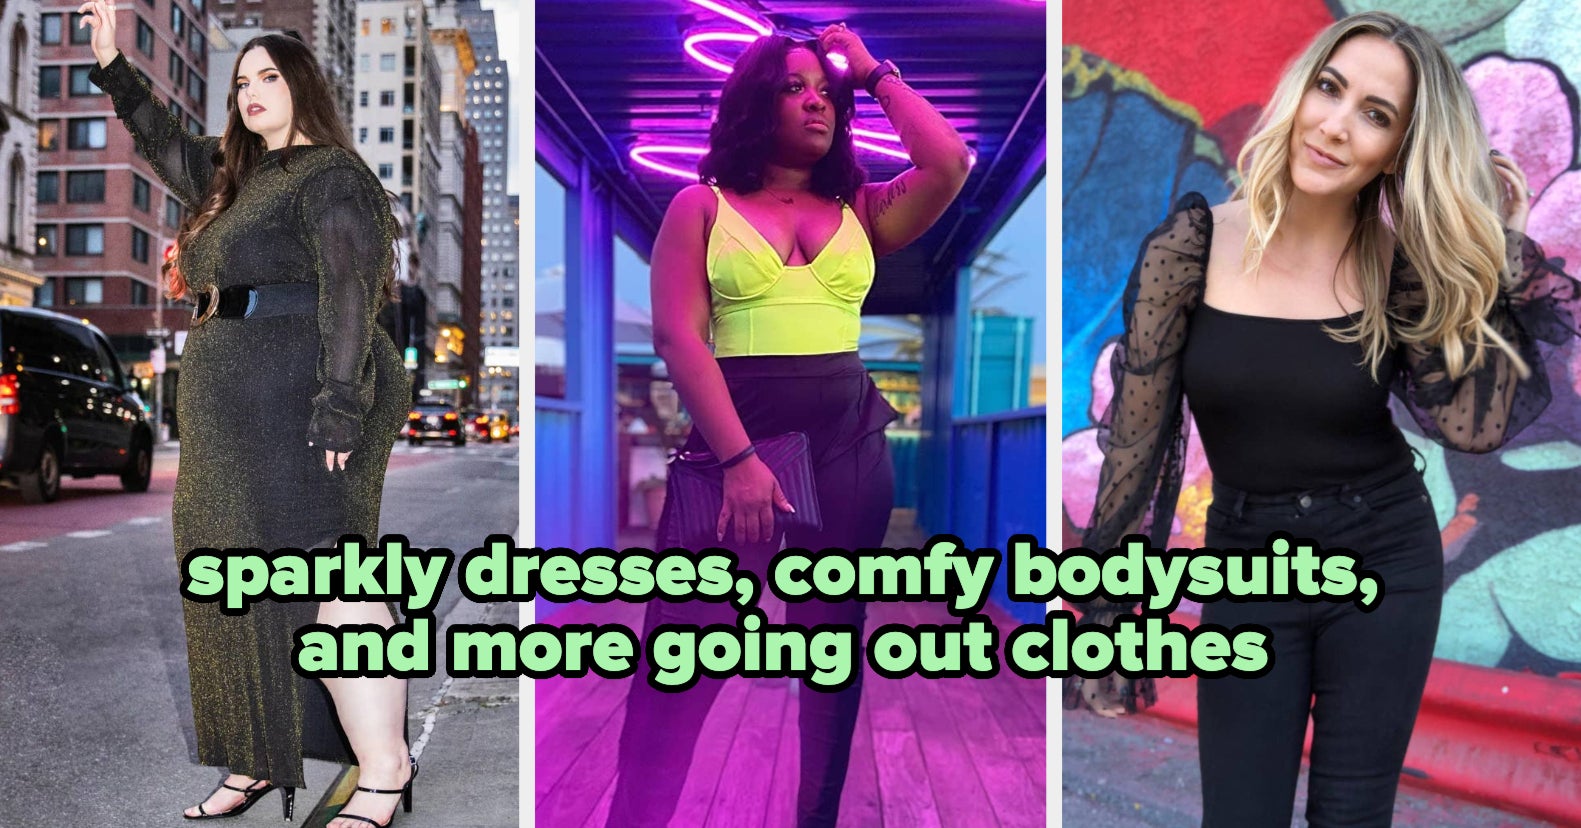 31 Going Out Clothes You'll Want For Next Weekend